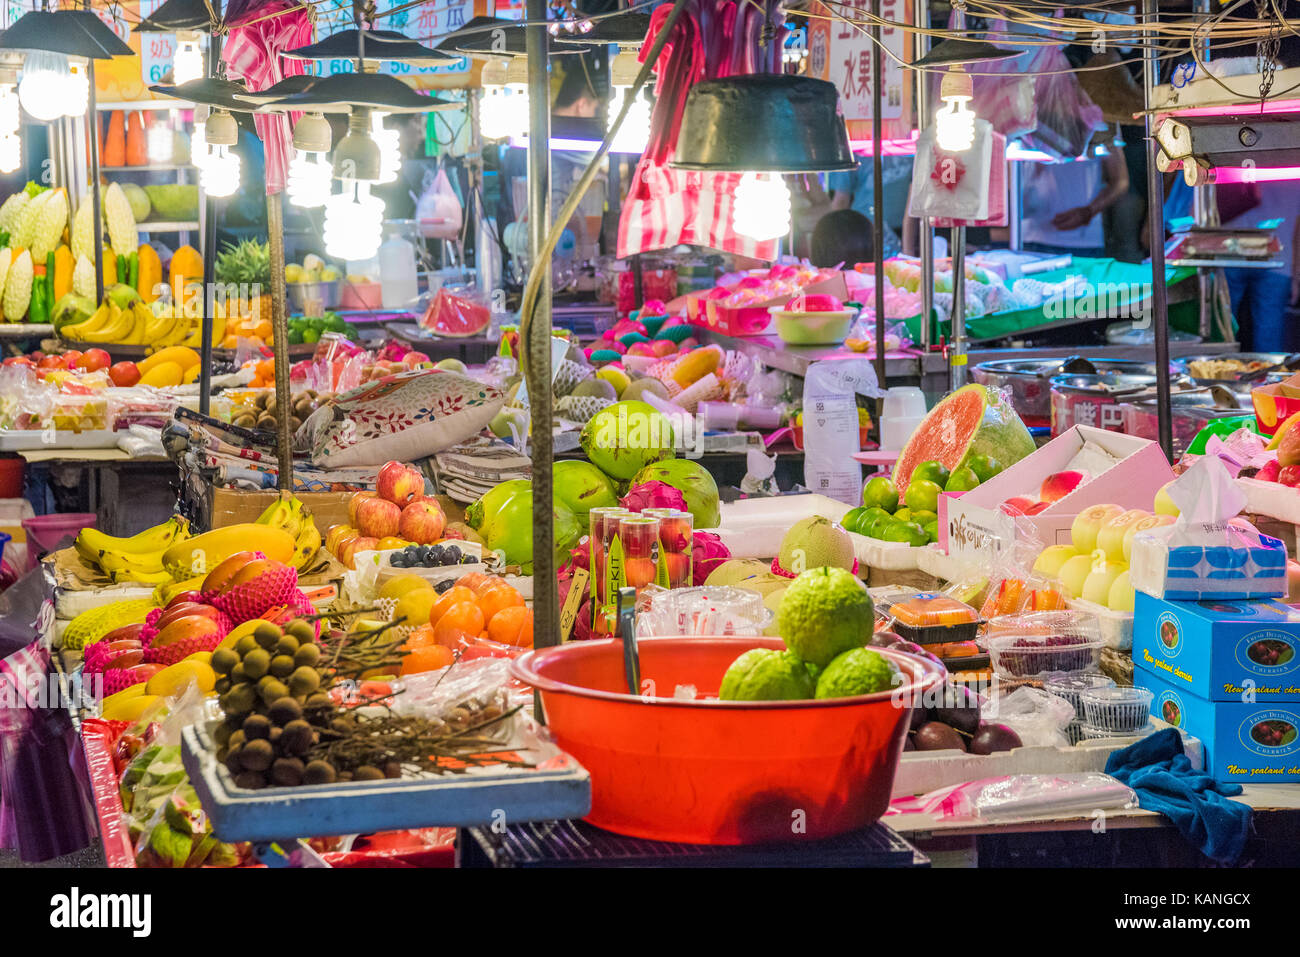 TAIPEI, TAIWAN - JULY 14: This is a typical night market fruit stall which are common across night markets in Taiwan on July 14, 2017 in Taipei Stock Photo